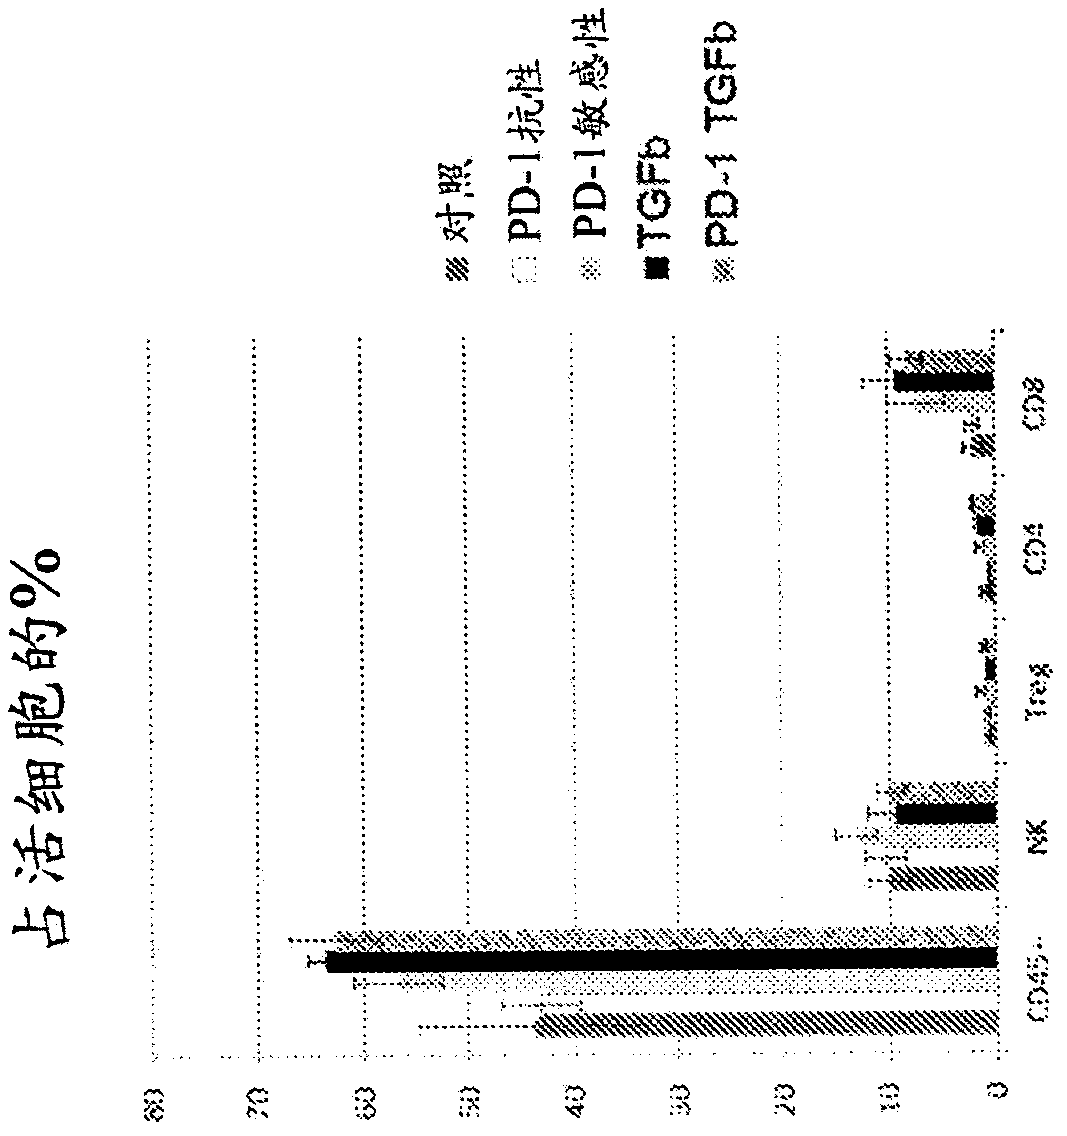 Treatment of cancer using inhibitors of tgf-beta and pd-1